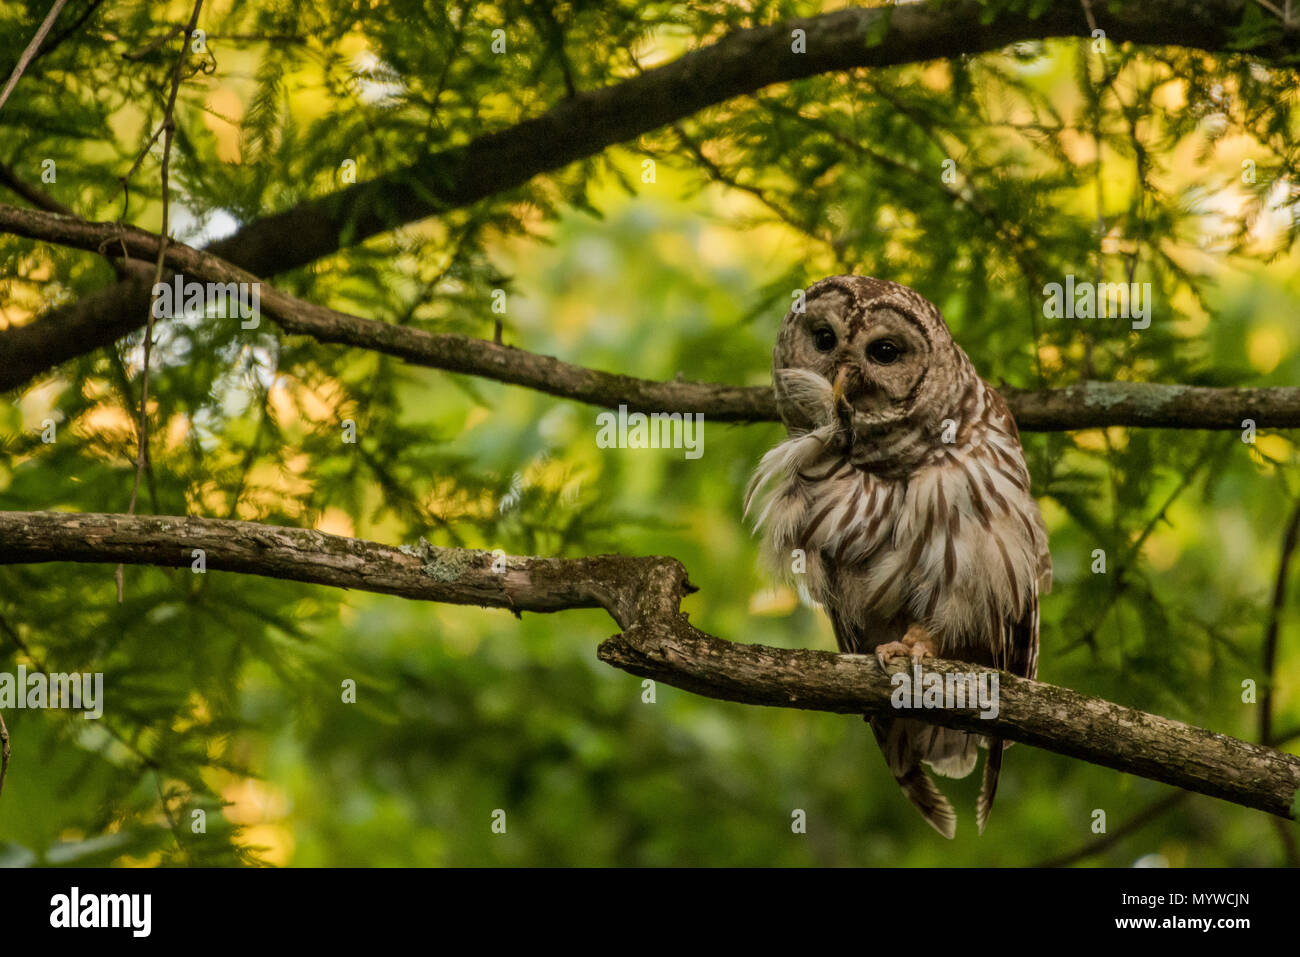 A barred owl (Strix varia) from North Carolina, these owls are nocturnal but can be observed active during the twilight hours as well. Stock Photo